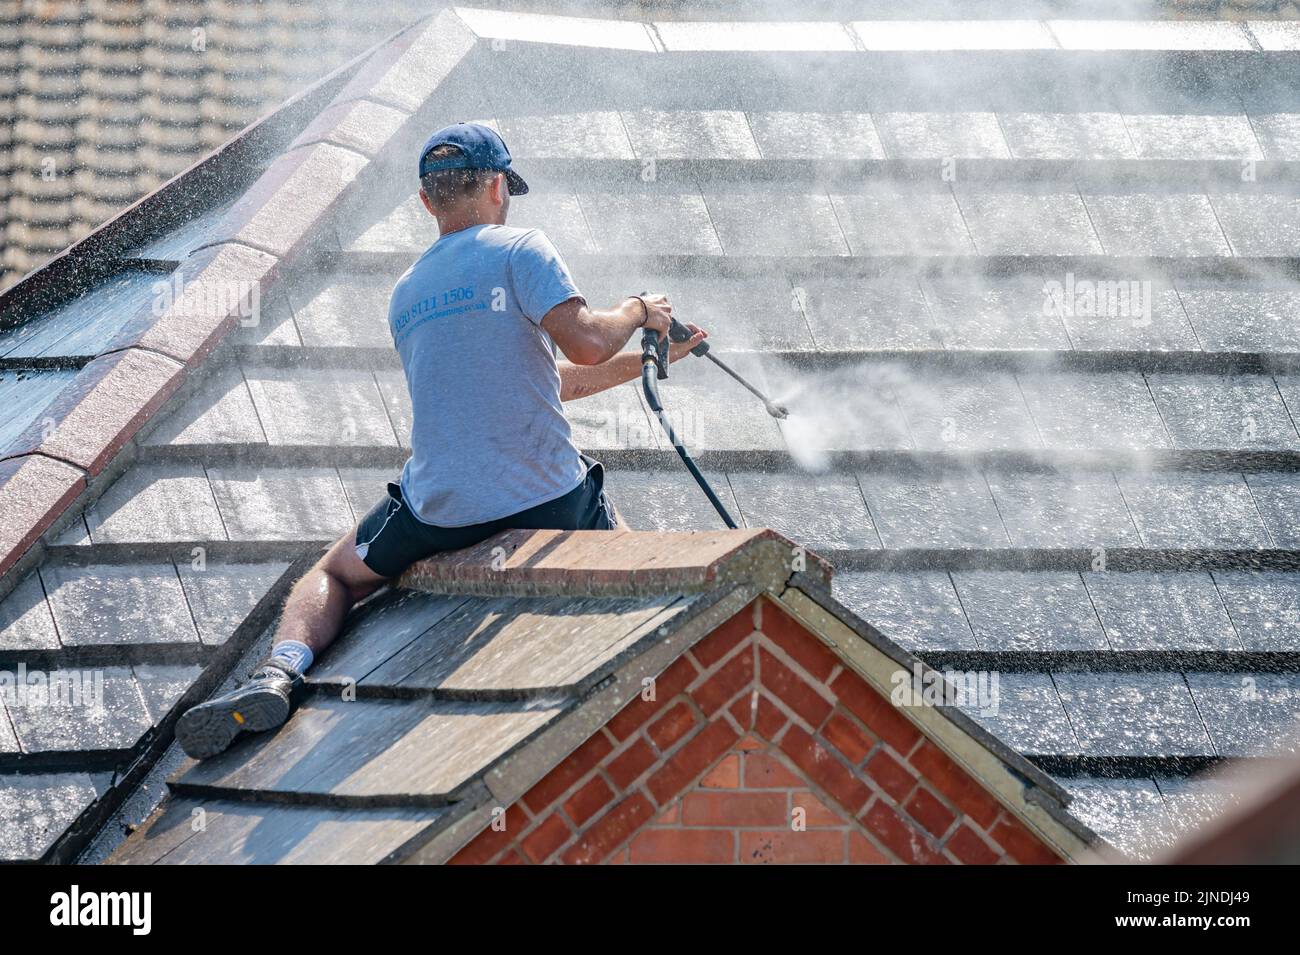 Man sitting on tiled roof of a house, using a pressure washer on a hose, firing out a jet of water for cleaning the roof and tiles. Stock Photo